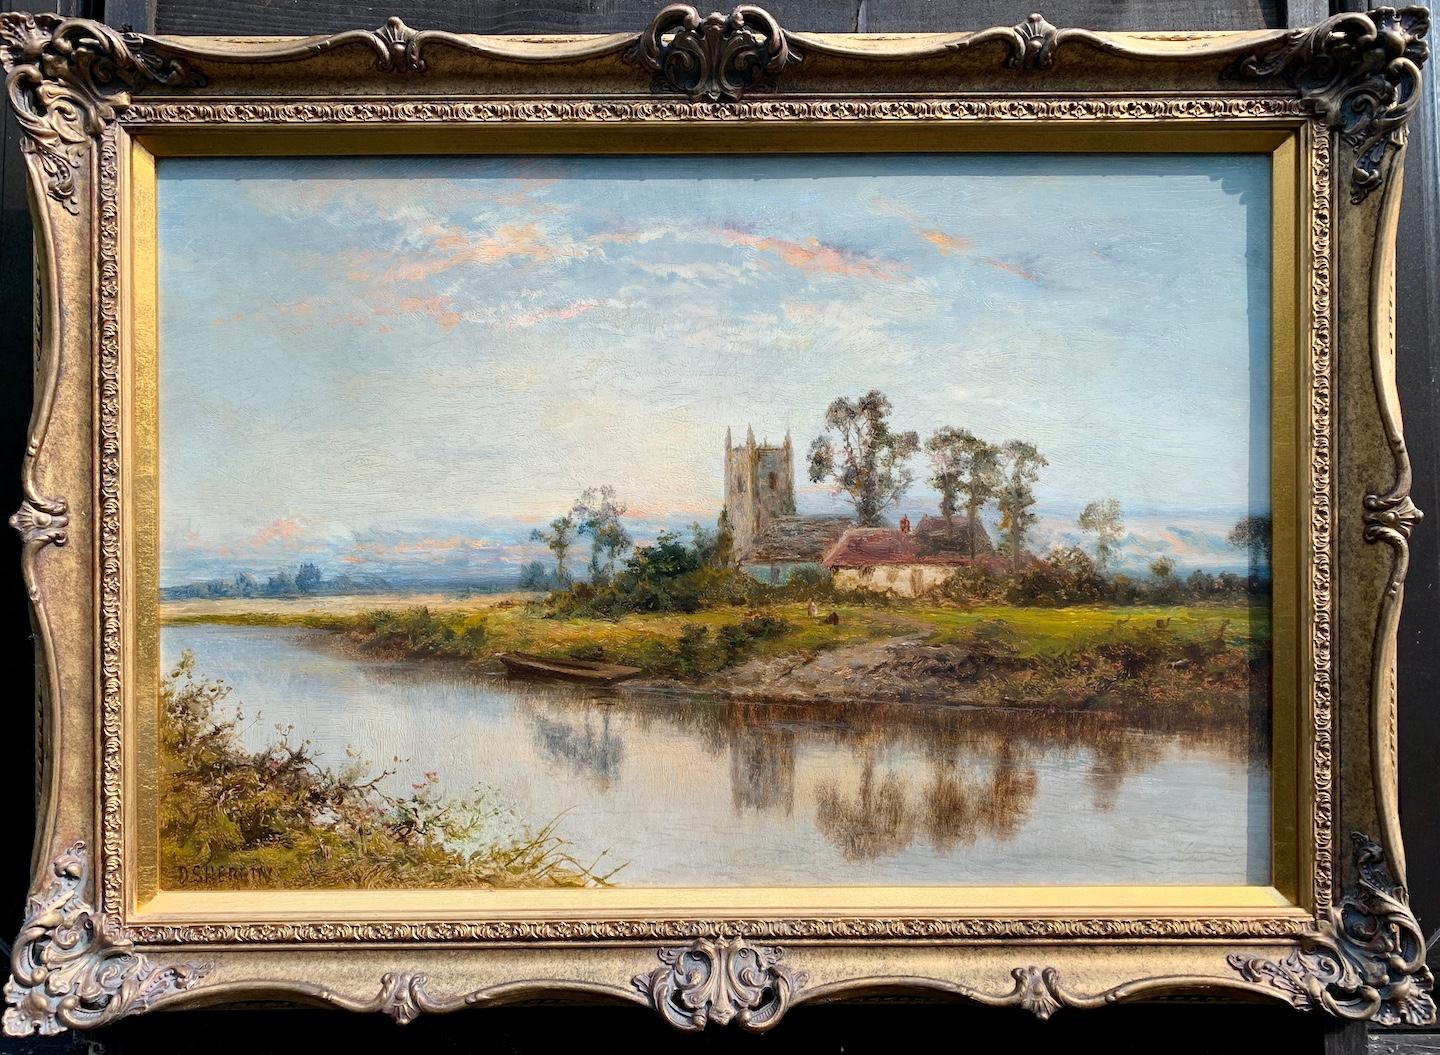 Daniel Sherrin Figurative Painting - Antique oil on canvas, English landscape with River, Church, Cottage at Sunrise